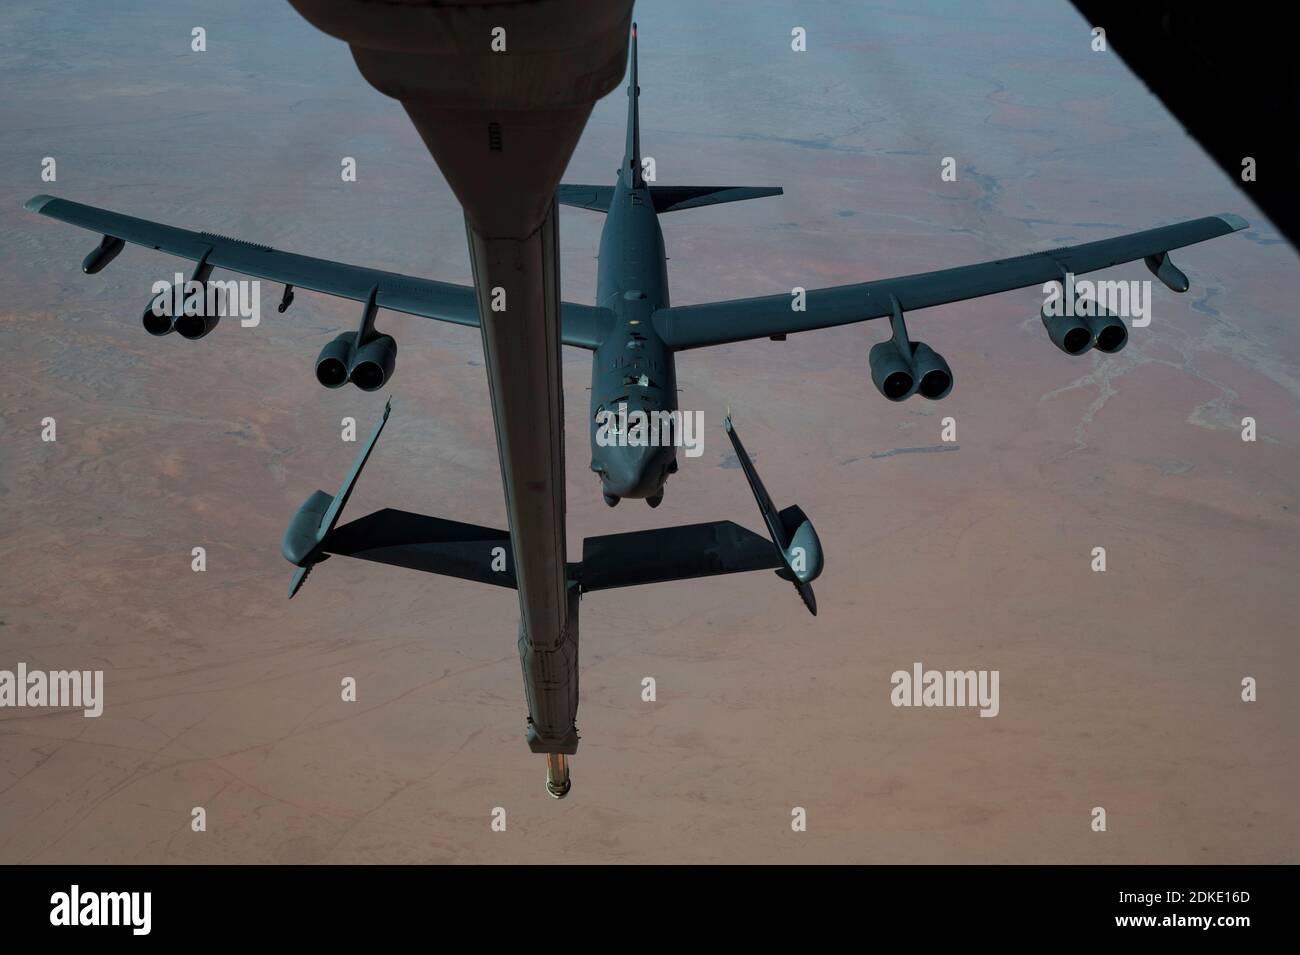 A U.S. Air Force B-52 Stratofortress strategic bomber aircraft from the 2nd Bomb Wing, positions for refueling inflight from a KC-135 Stratotanker aircraft during a multi-day Bomber Task Force mission December 10, 2020 over Qatar. The bomber was relocated to the region following an increase in tensions with Iran. Stock Photo